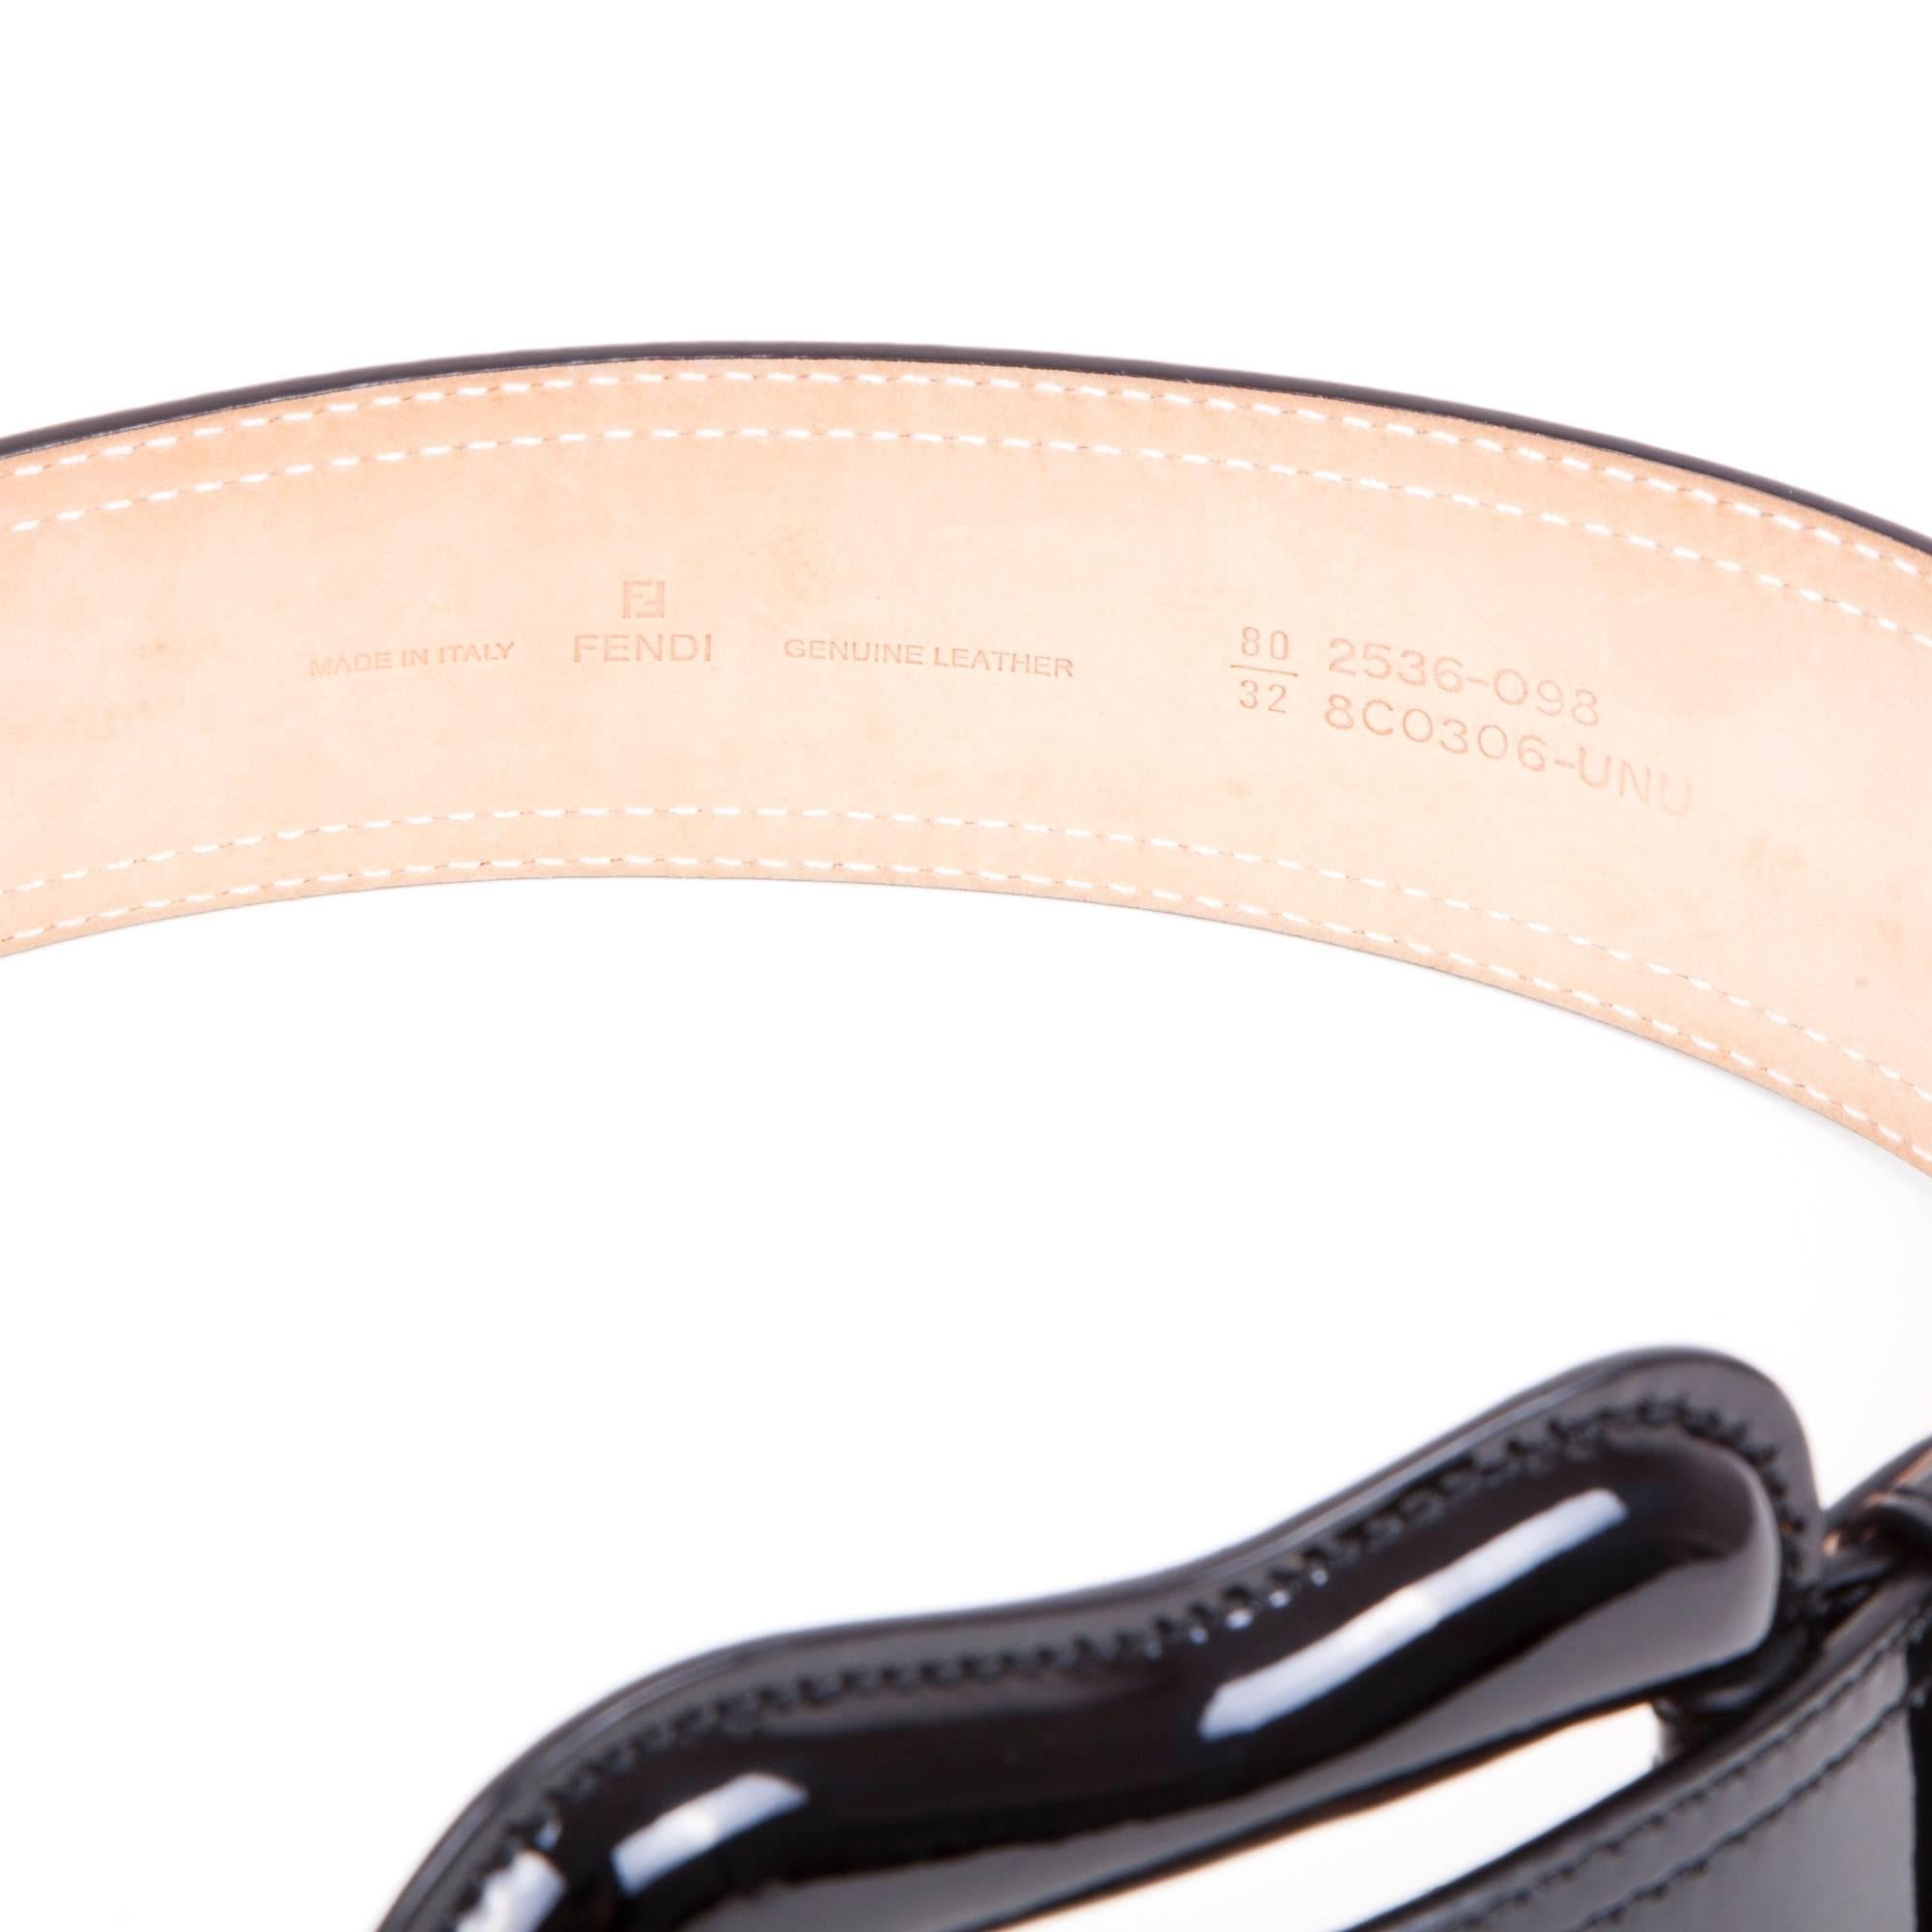 Fendi belt in black patent leather. Beige leather interior. Clasp in loop. In very good condition. Size 80

Made in Italy.

Dimensions: length at first hole 76 cm, last hole 90 cm, height 6 cm.

Will be delivered in a new, non-original dust bag